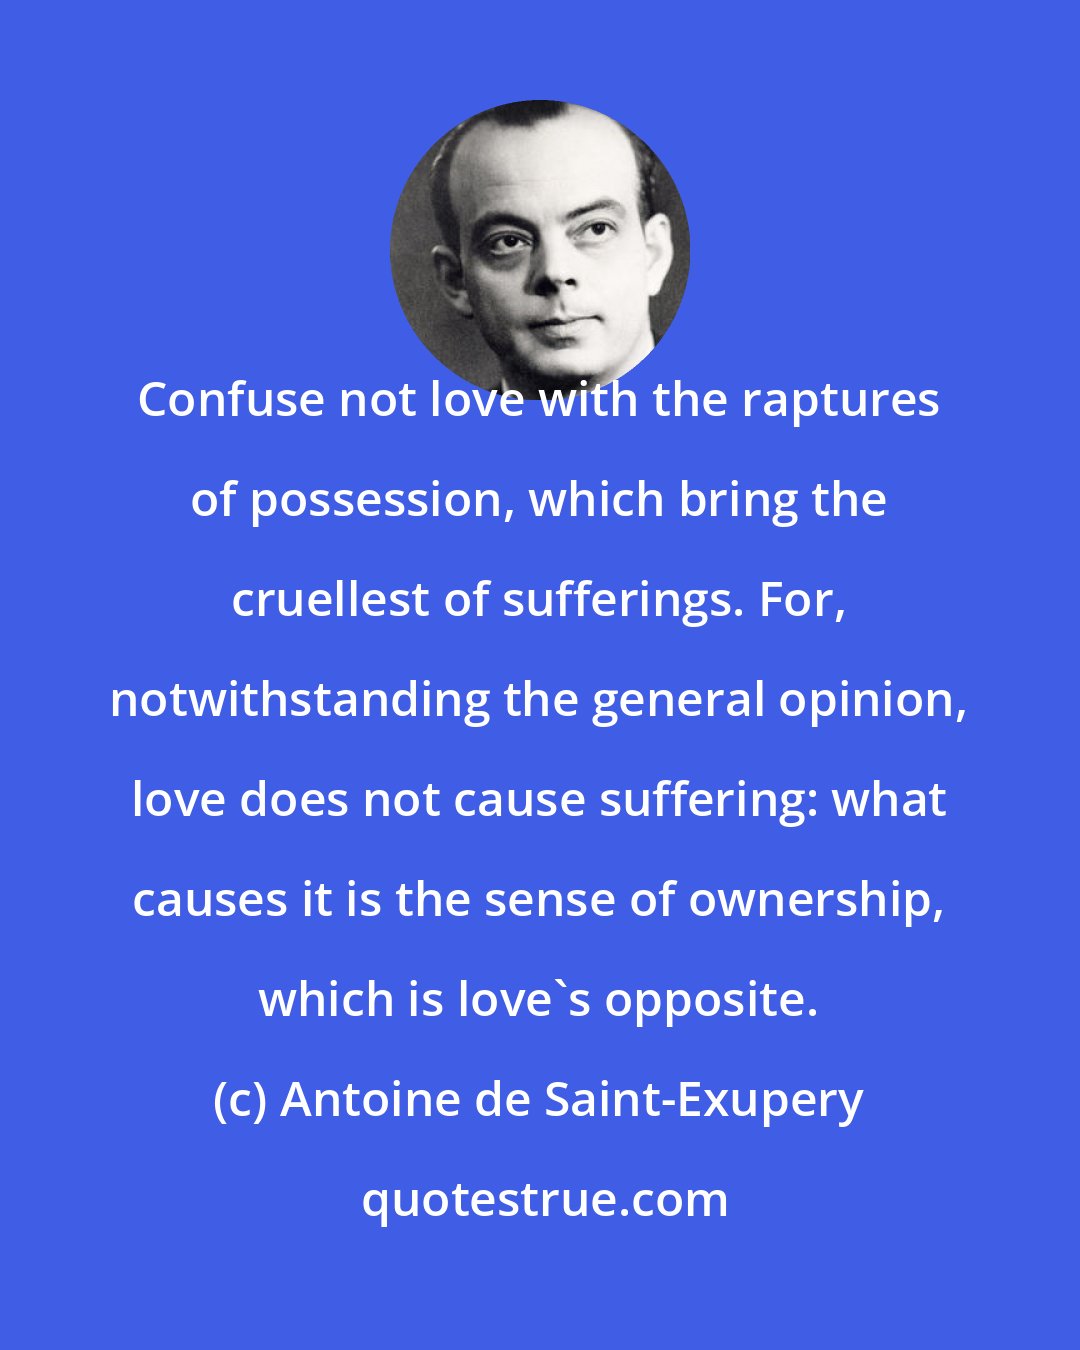 Antoine de Saint-Exupery: Confuse not love with the raptures of possession, which bring the cruellest of sufferings. For, notwithstanding the general opinion, love does not cause suffering: what causes it is the sense of ownership, which is love's opposite.